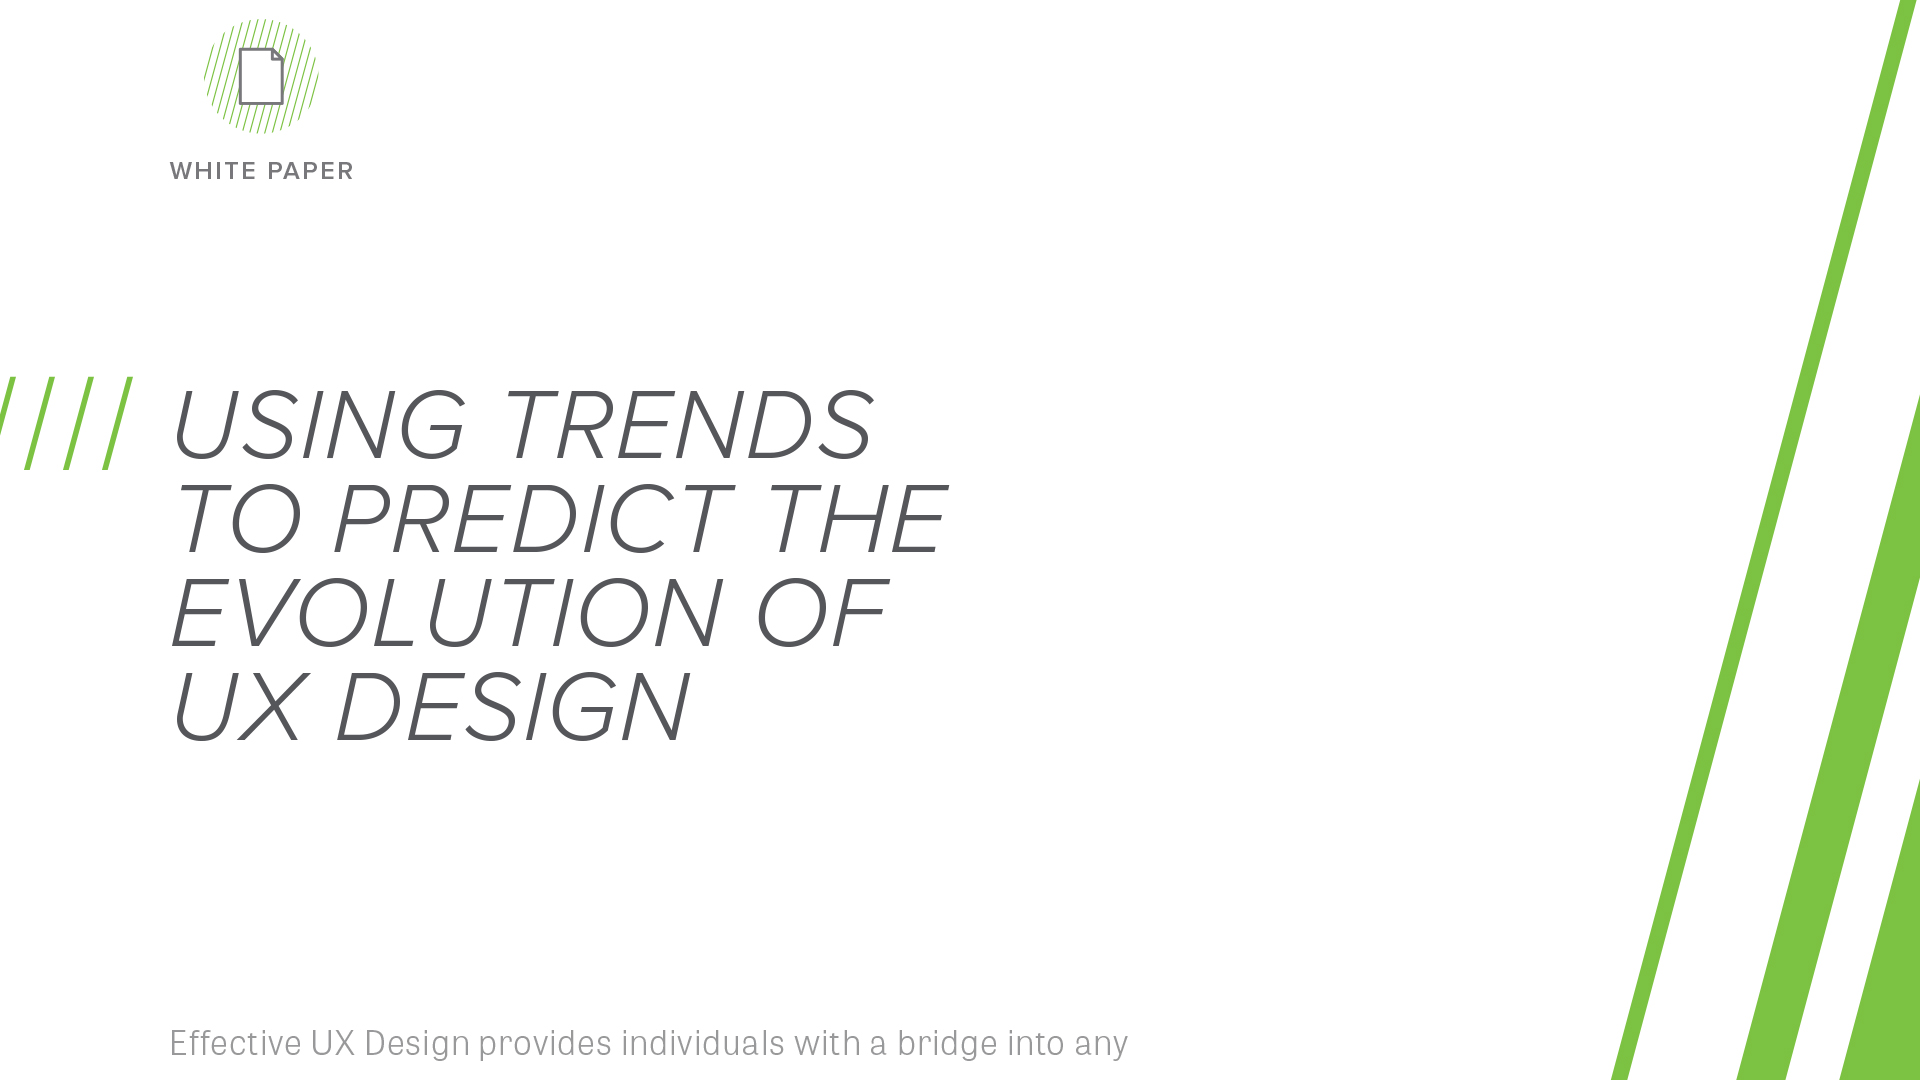 Featured Images: Using Trends to Predict the Evolution of UX Design